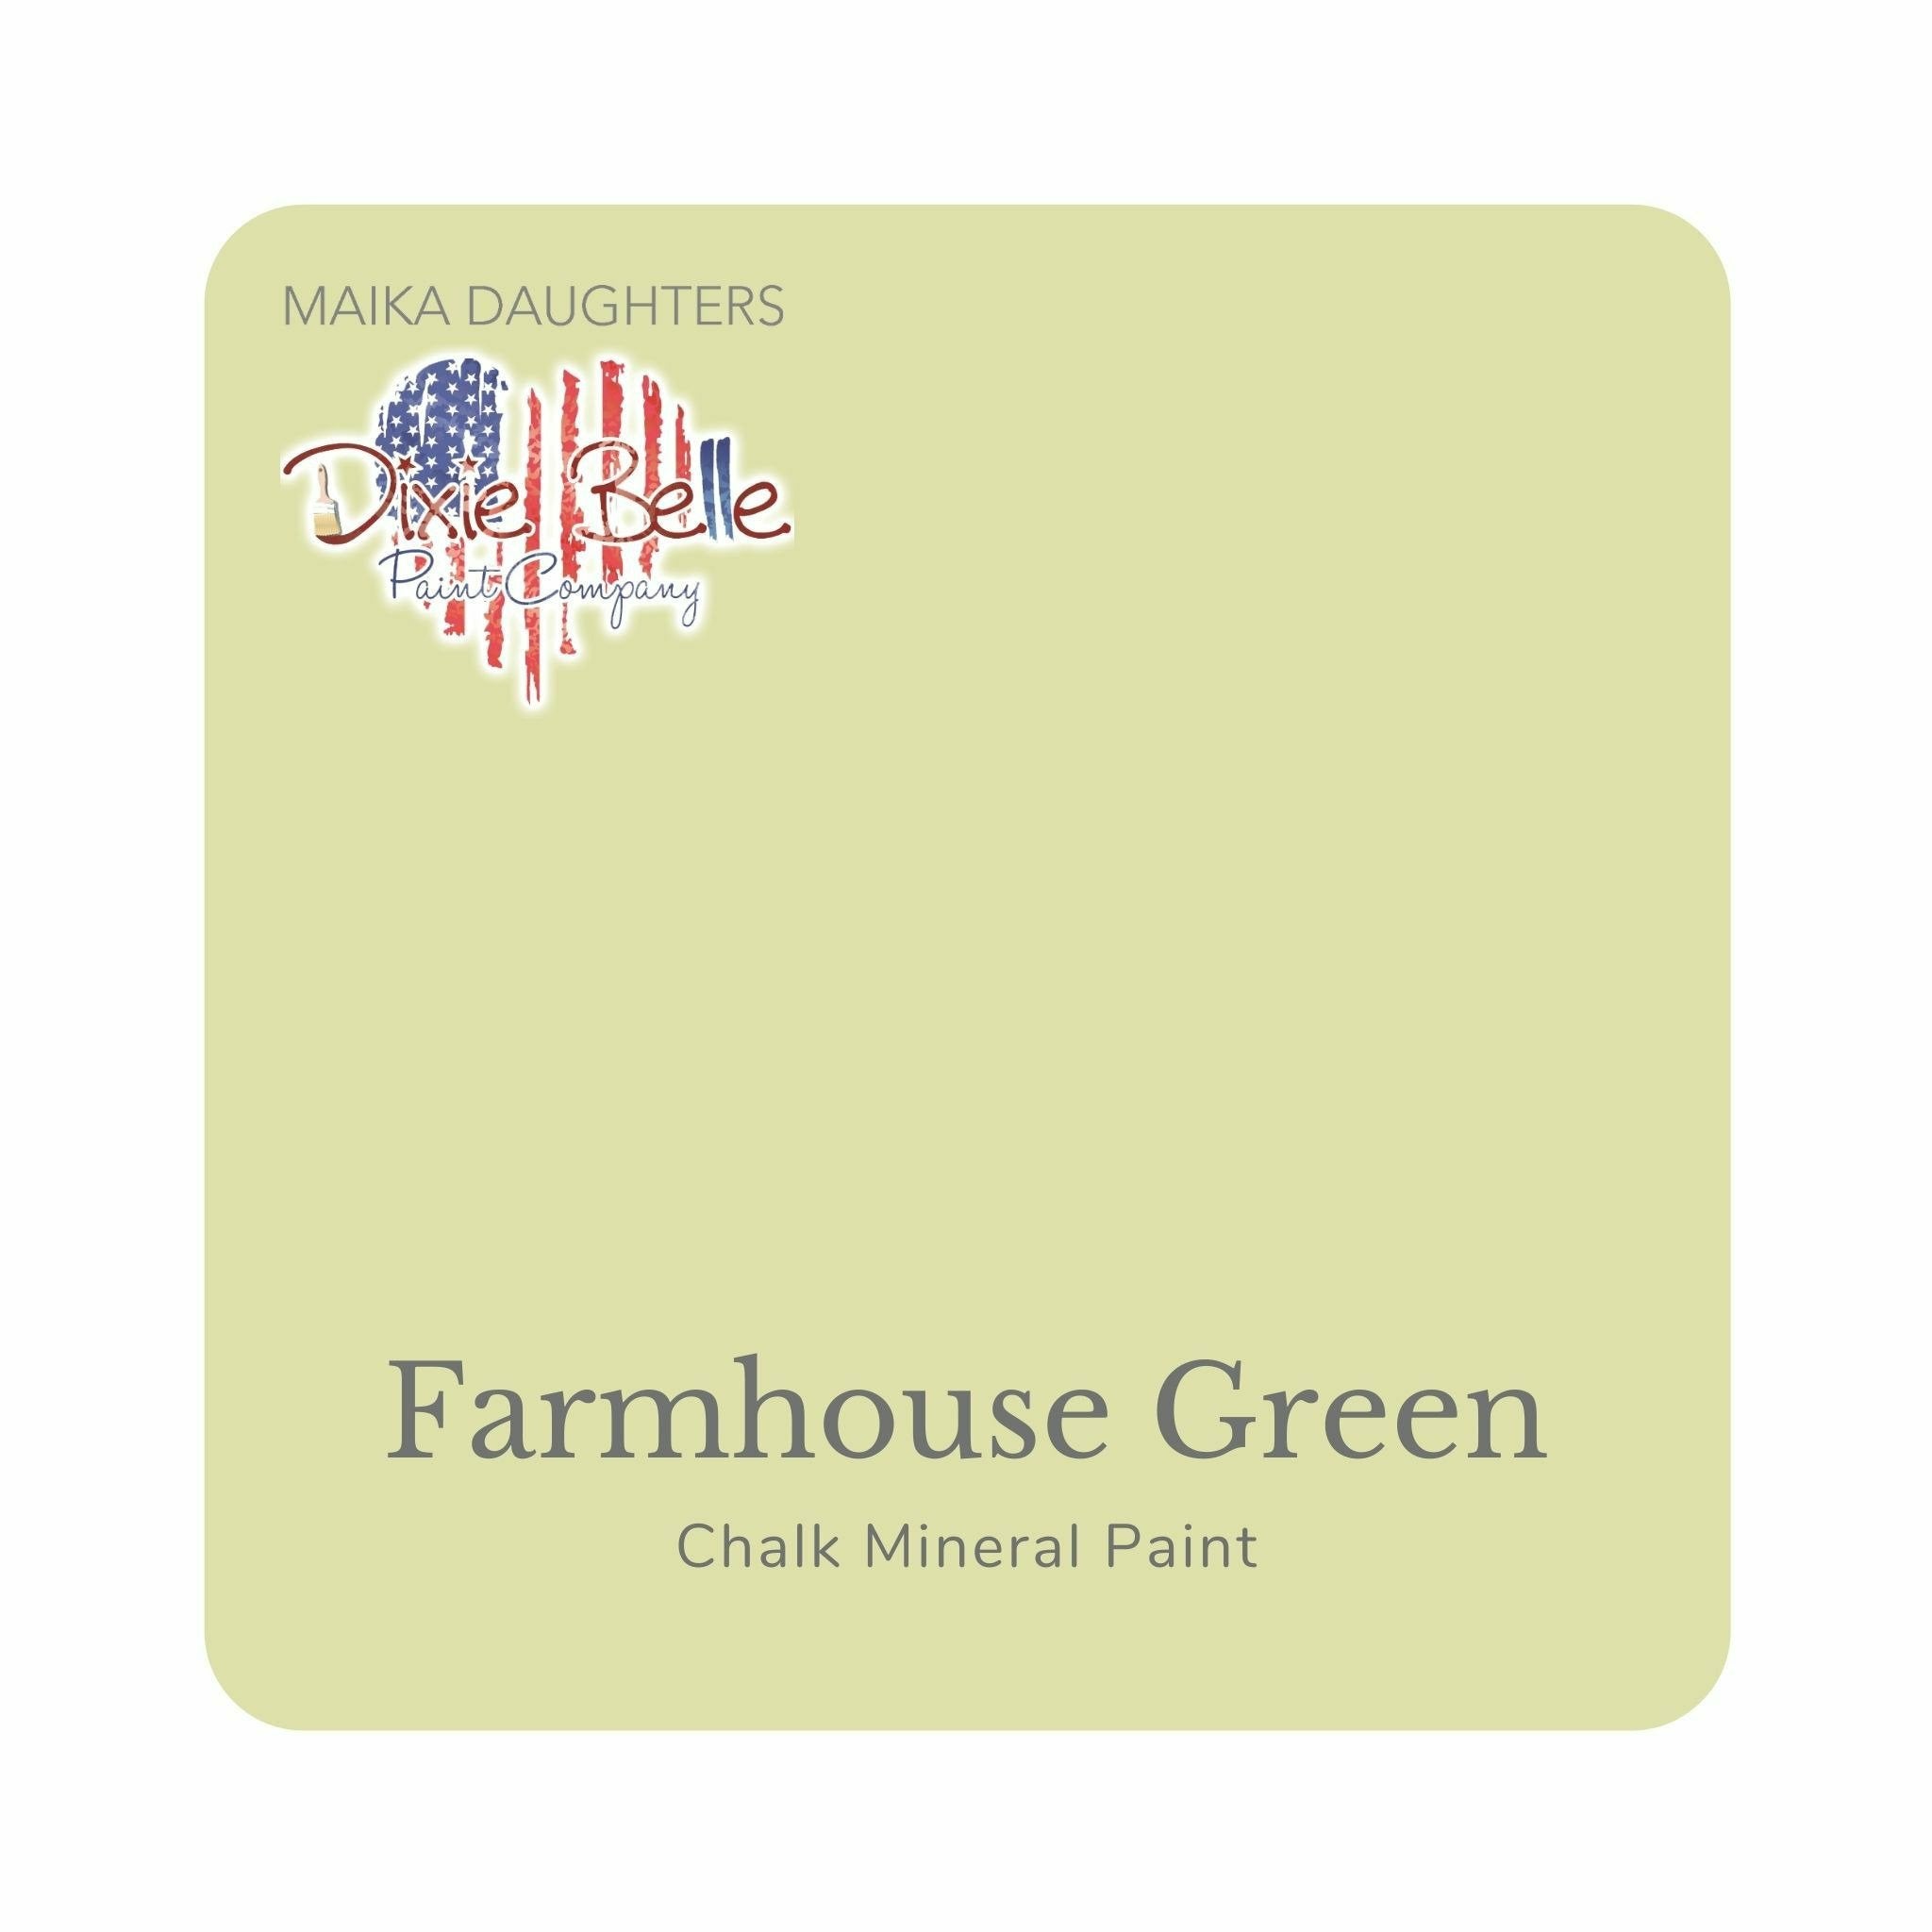 A square swatch card of Dixie Belle Paint Company’s Farmhouse Green Chalk Mineral Paint is against a white background. This color is a soft pale green with gray hues.